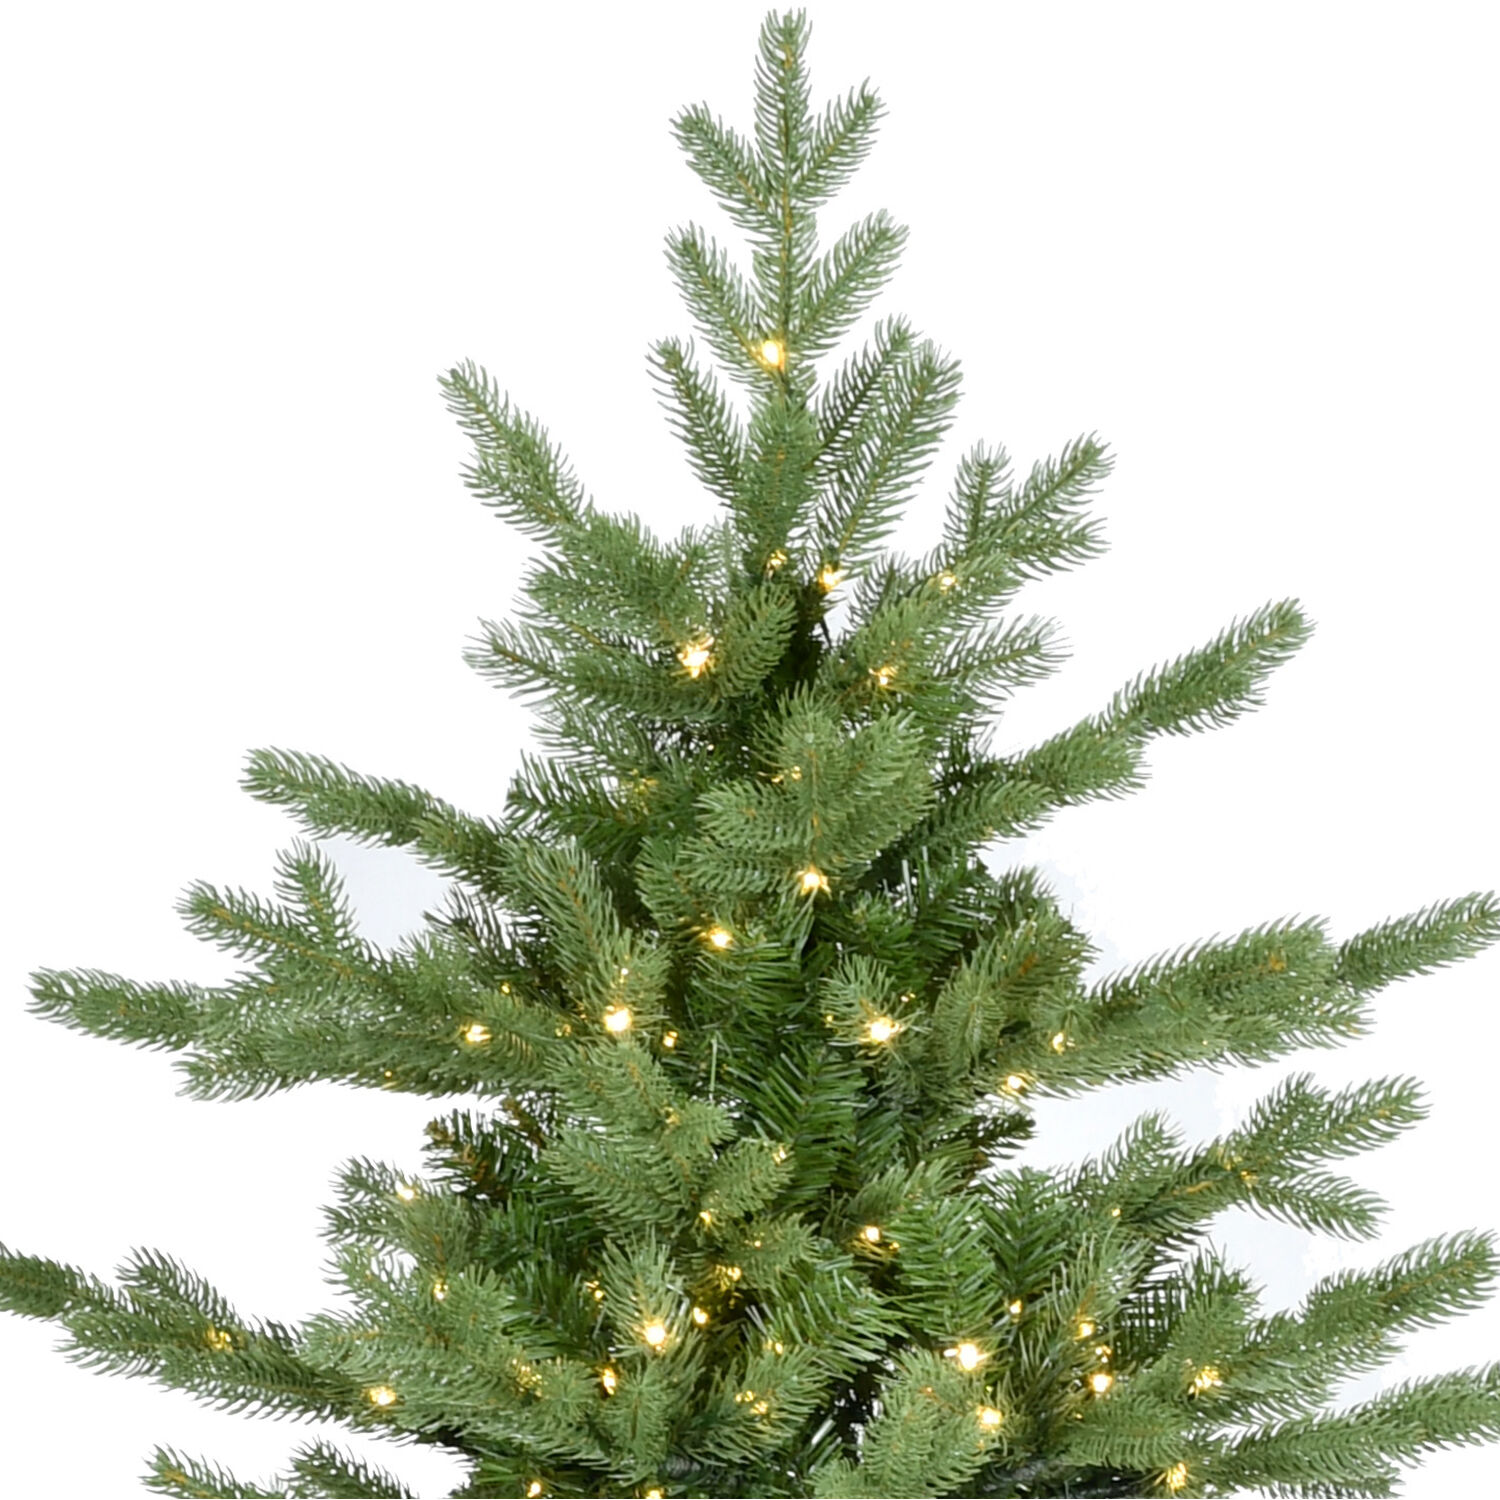 Traditional Prelit Artificial Christmas Tree with Warm Lights and Metal Stand, Wide Realistic Tree The Holiday Aisle Size: 6.5' H